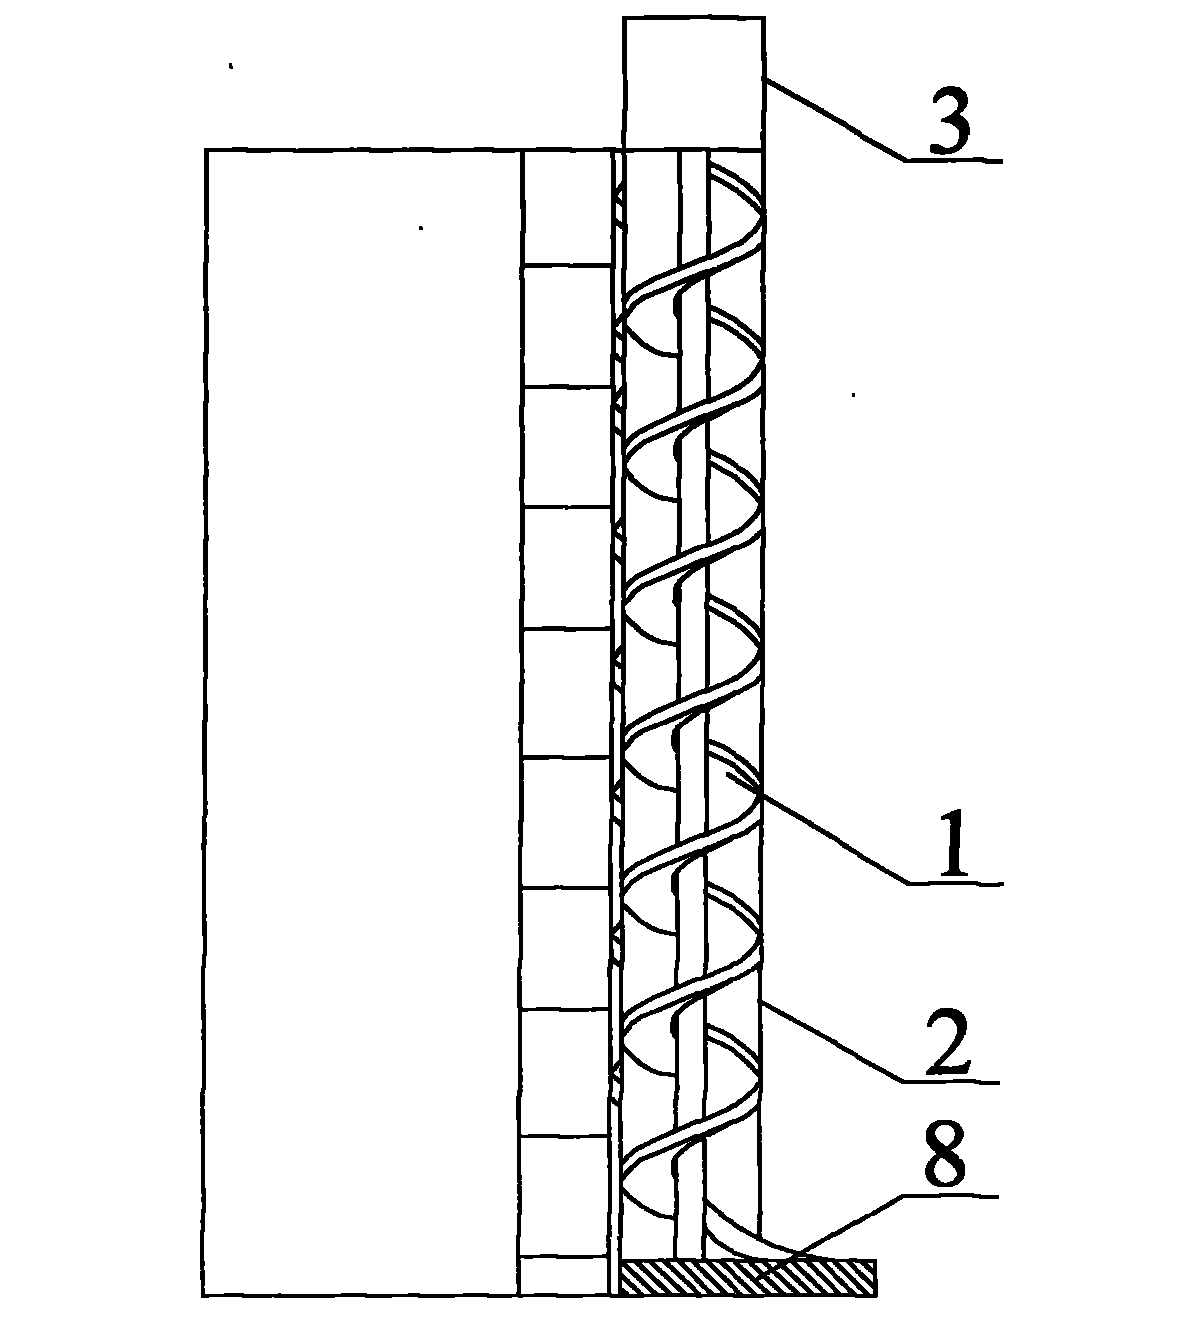 Telescopic type emergency escaping device for high-rise buildings